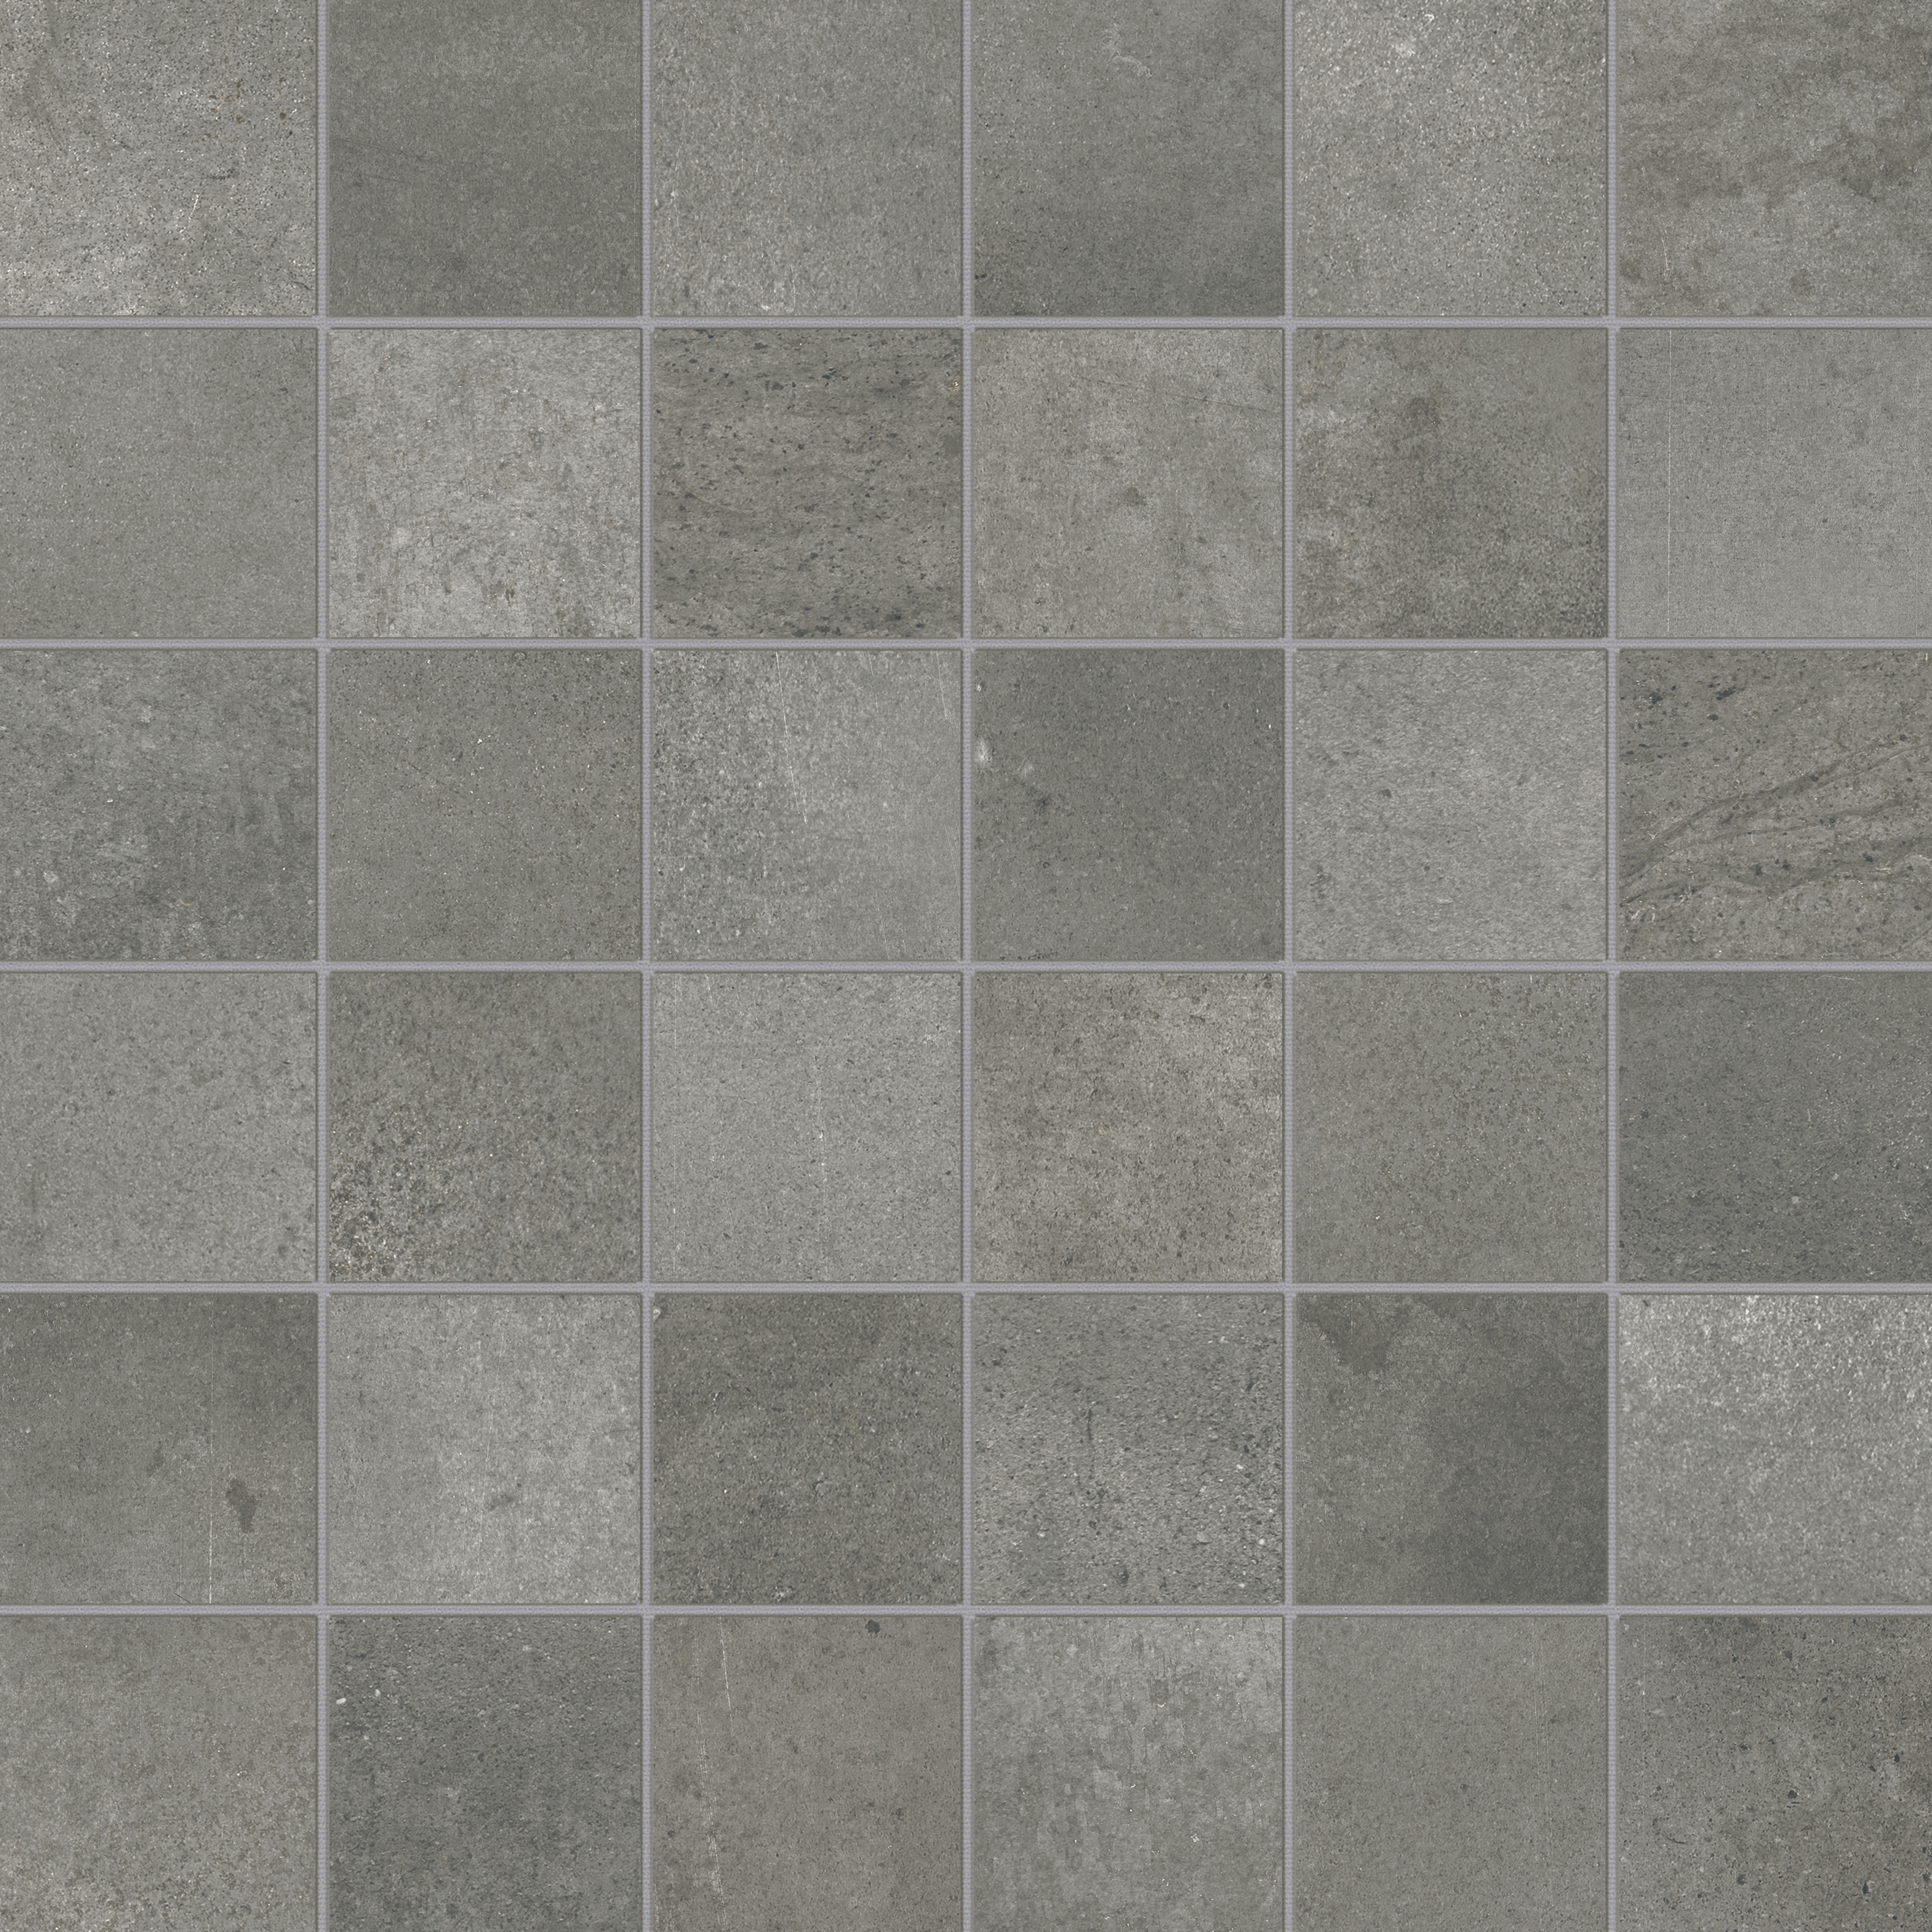 titanium straight stack 2x2-inch pattern color body porcelain mosaic from ceraforge anatolia collection distributed by surface group international matte finish straight edge edge mesh shape